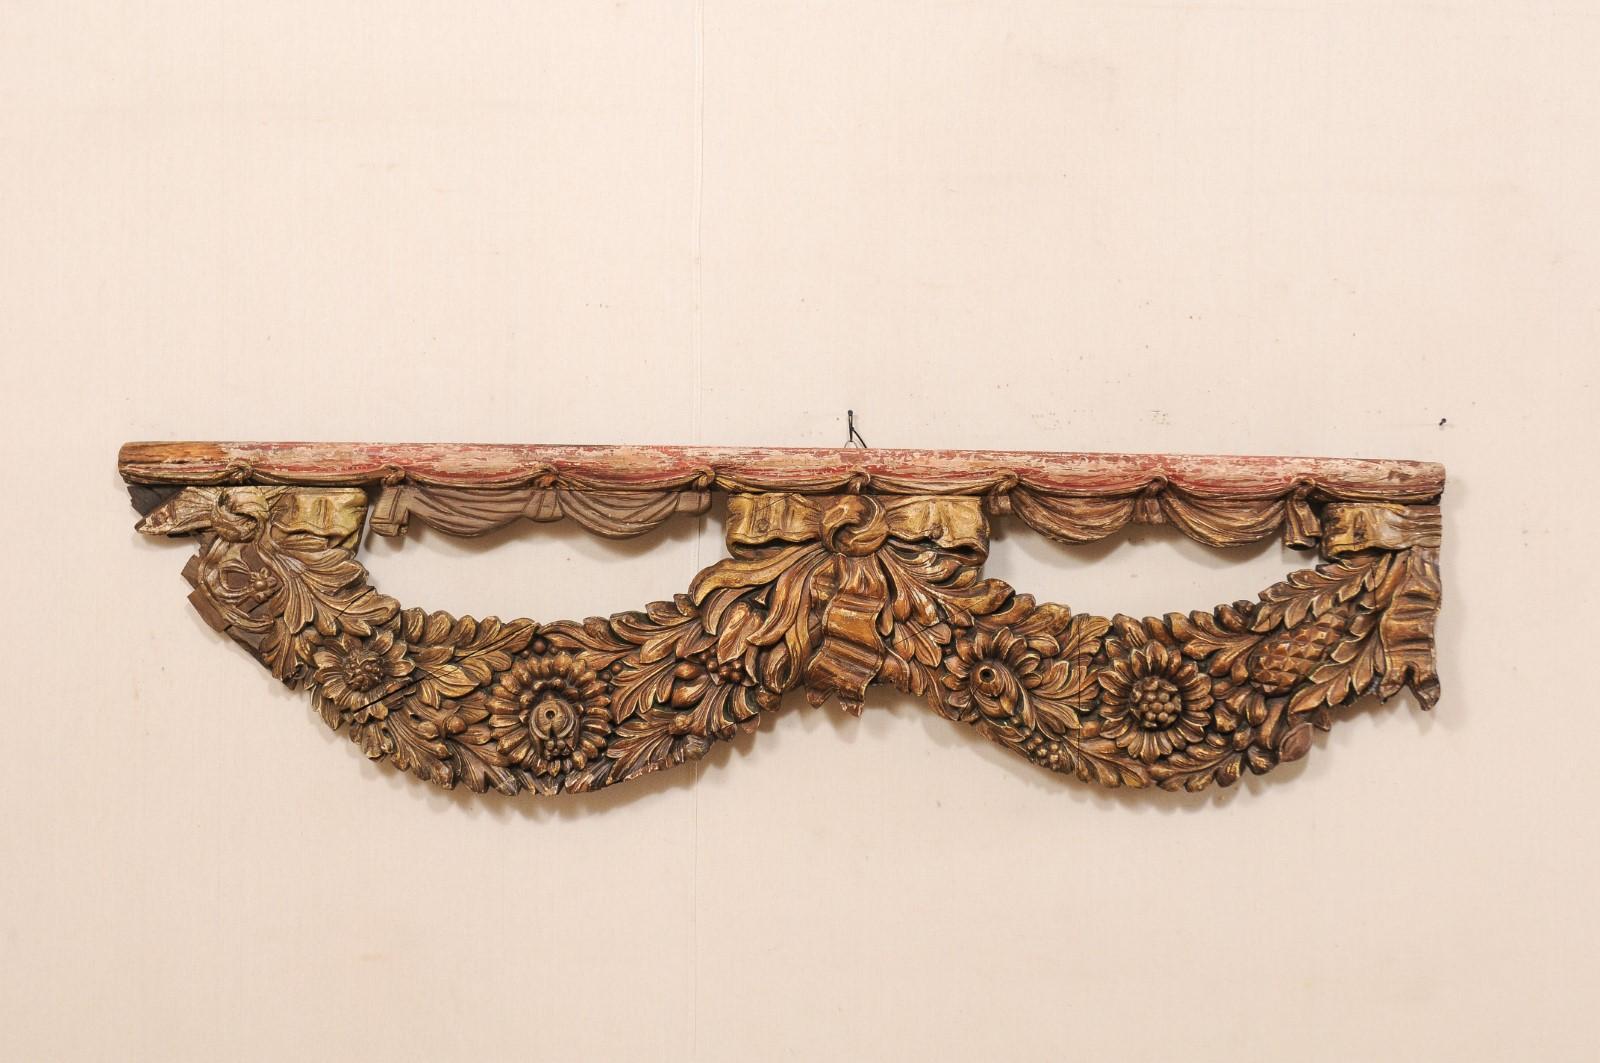 A French carved wood fragment from the early 19th century. This antique wall decoration from France has an overall oblong, just shy of 6.5 feet in length, having a horizontally positioned shape, with a level, wooden top rail draped with several